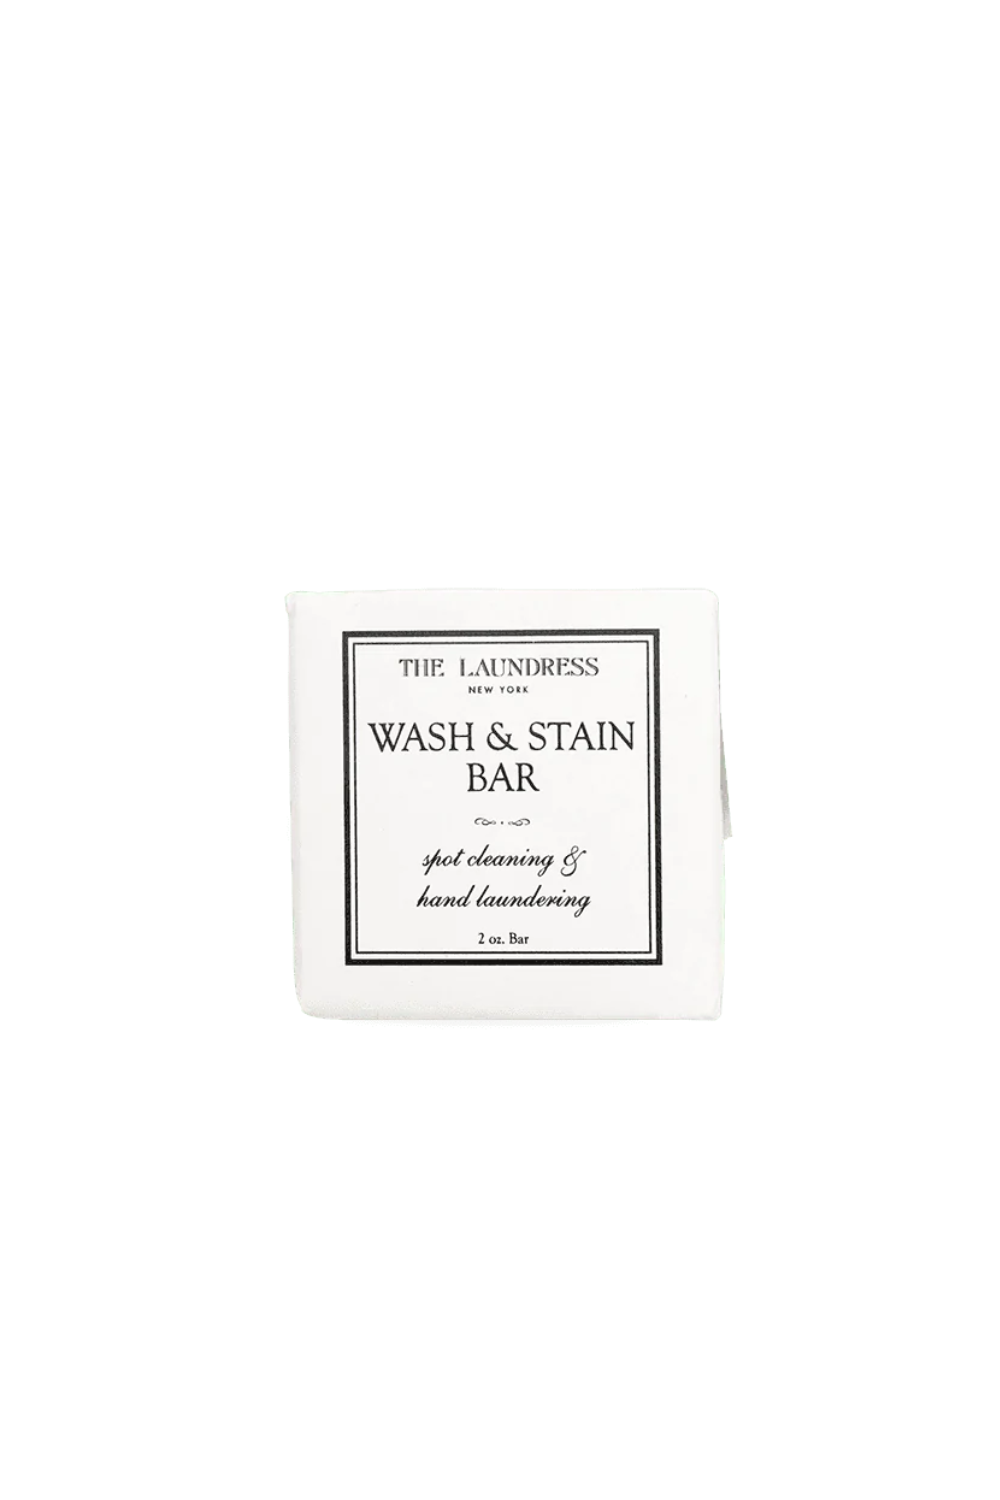 O'TAY Wash and Stain Bar Plejeprodukter